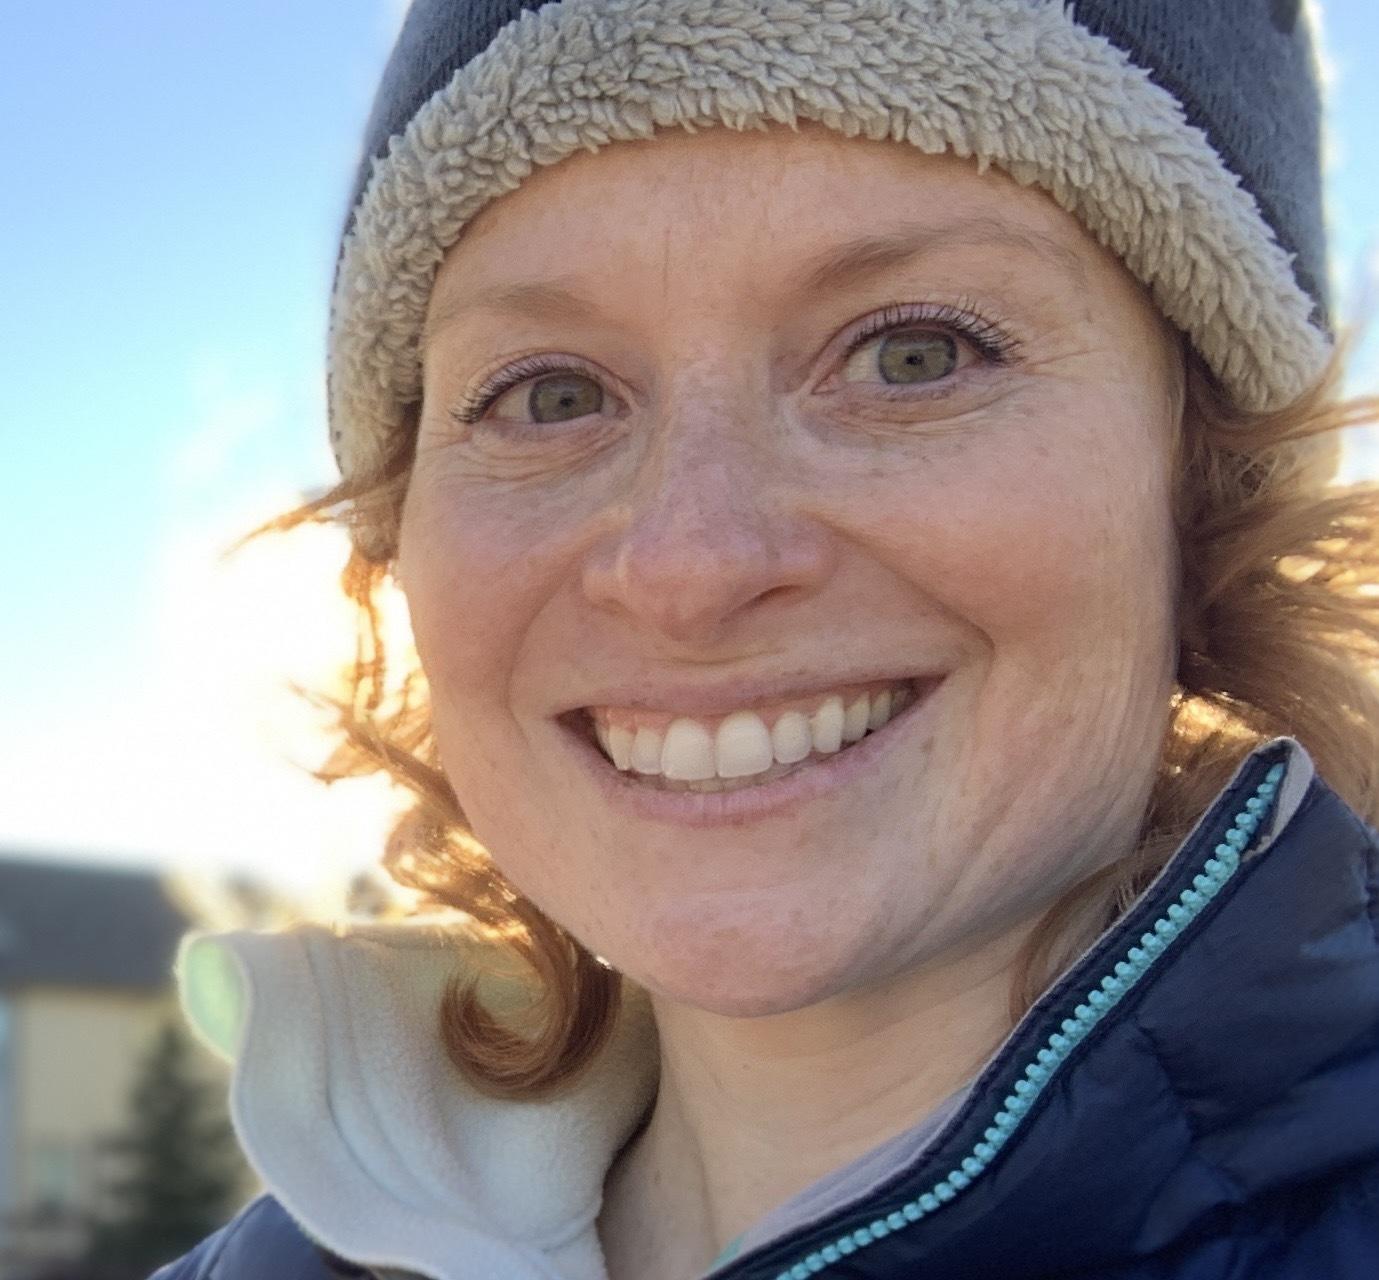 A profile photo of Debra Alban. Debra is a person who is white with shoulder-length, curly red hair. She is wearing a fur hat and winter jacket and is standing in front of a blue sky.